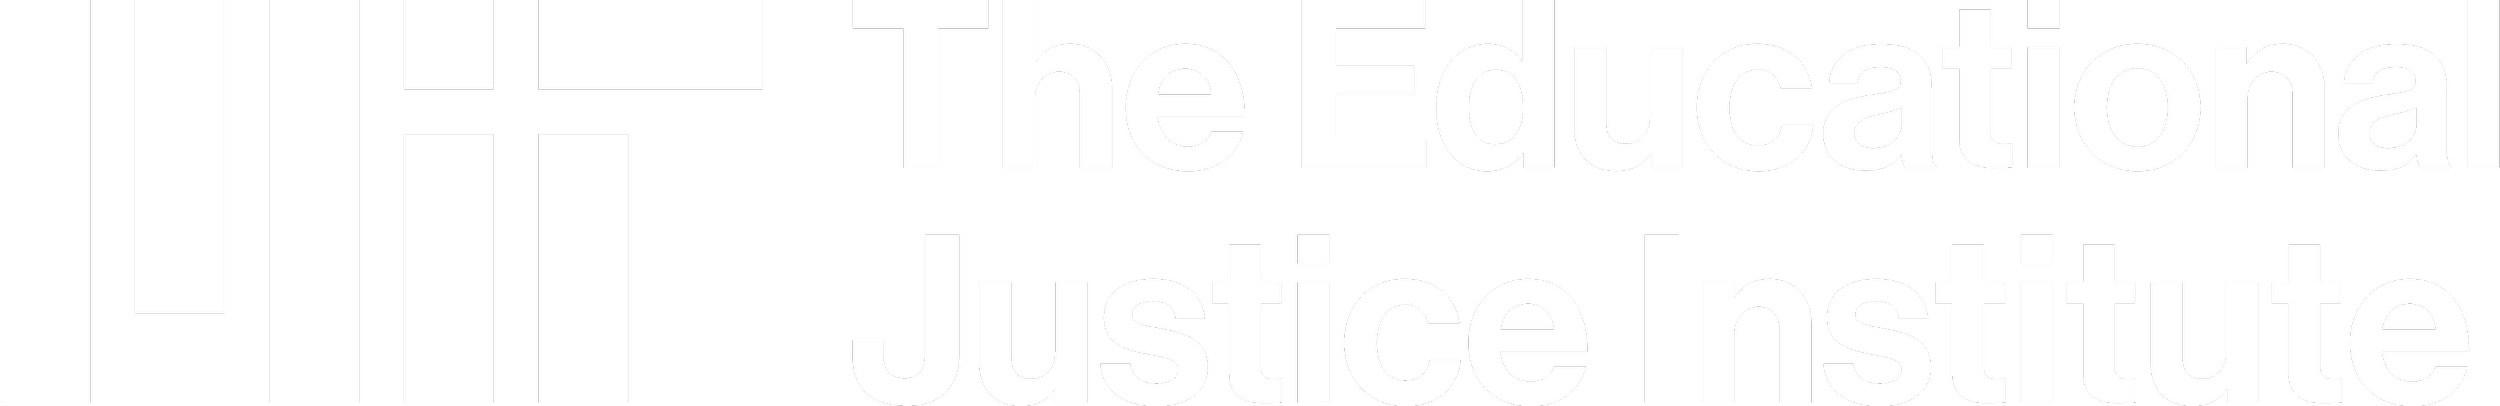 The Educational Justice Institute at MIT